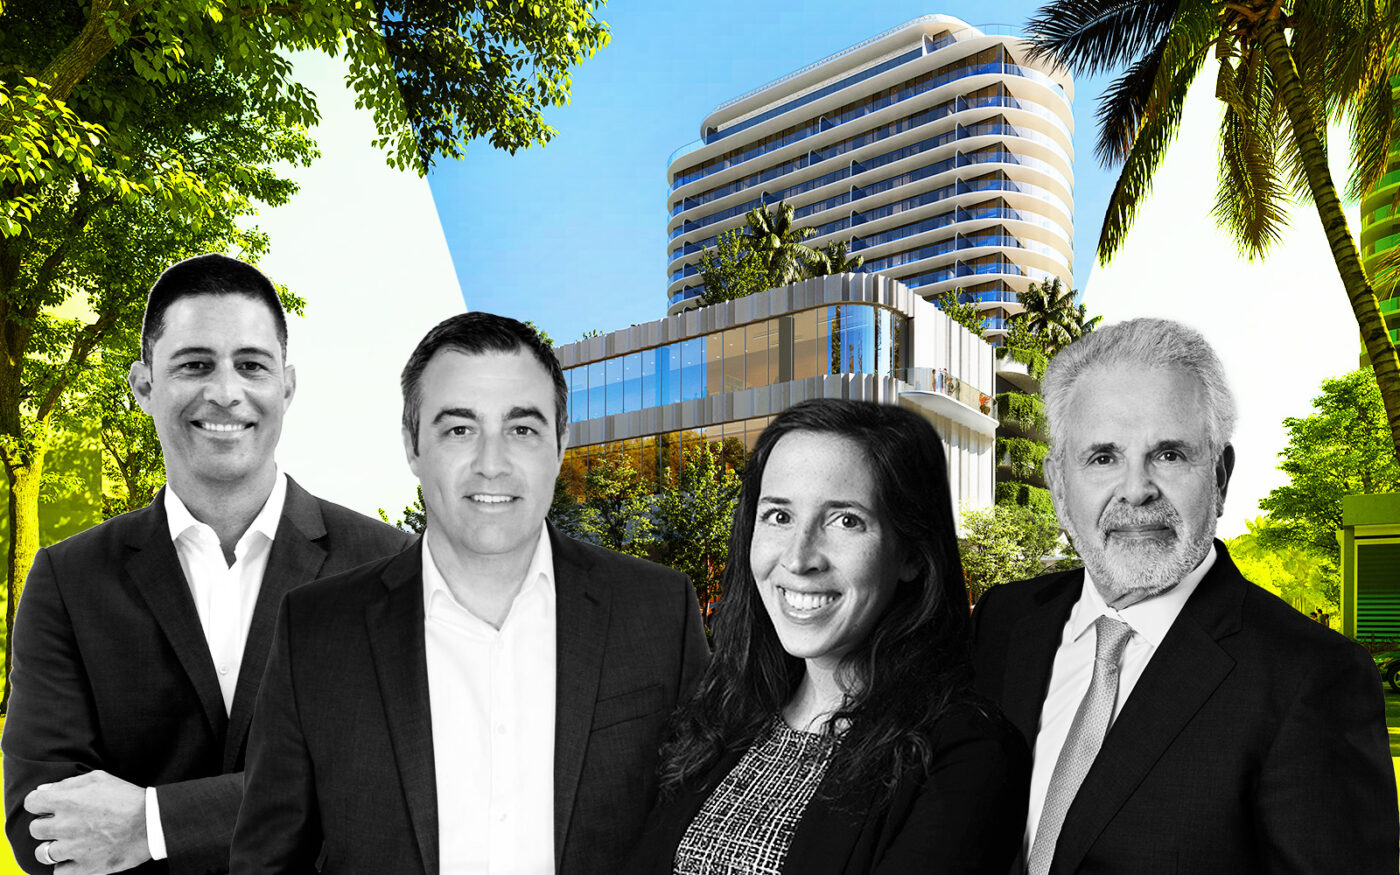 Joint Venture Gains Design Approval for Miami Beach Condo Project